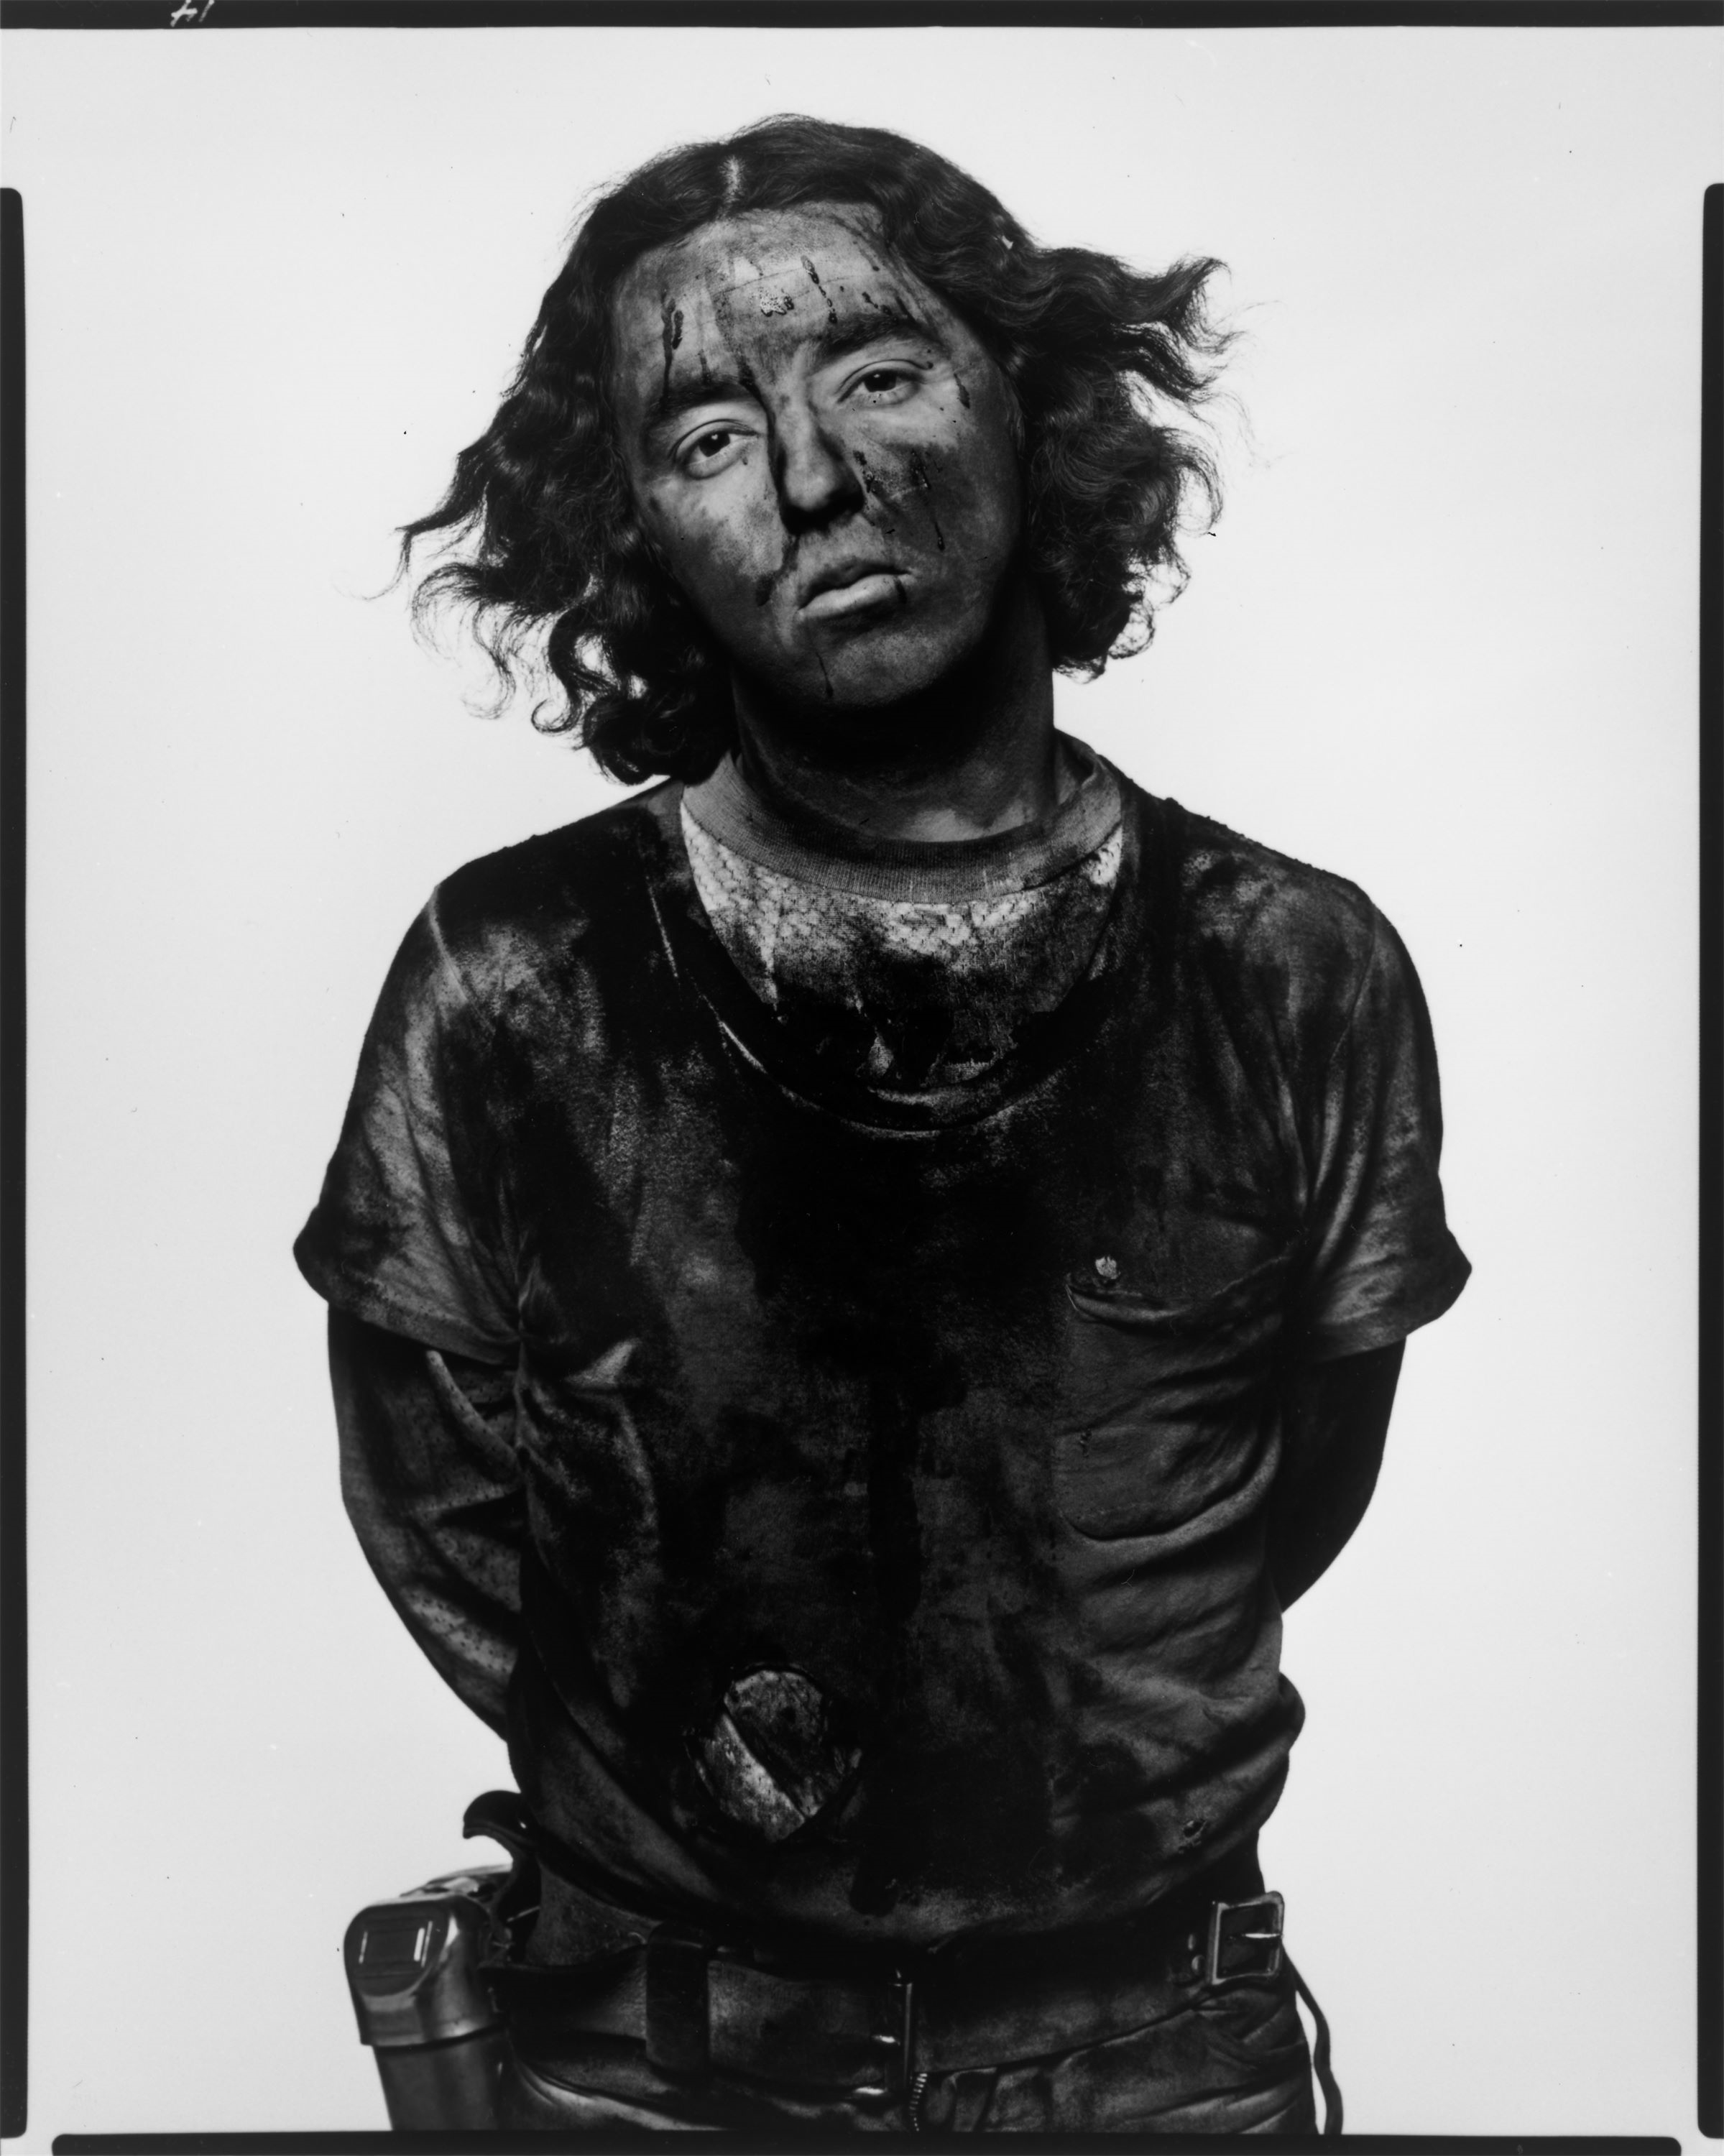 Richard Avedon | Book: ”In the American West” with photograph